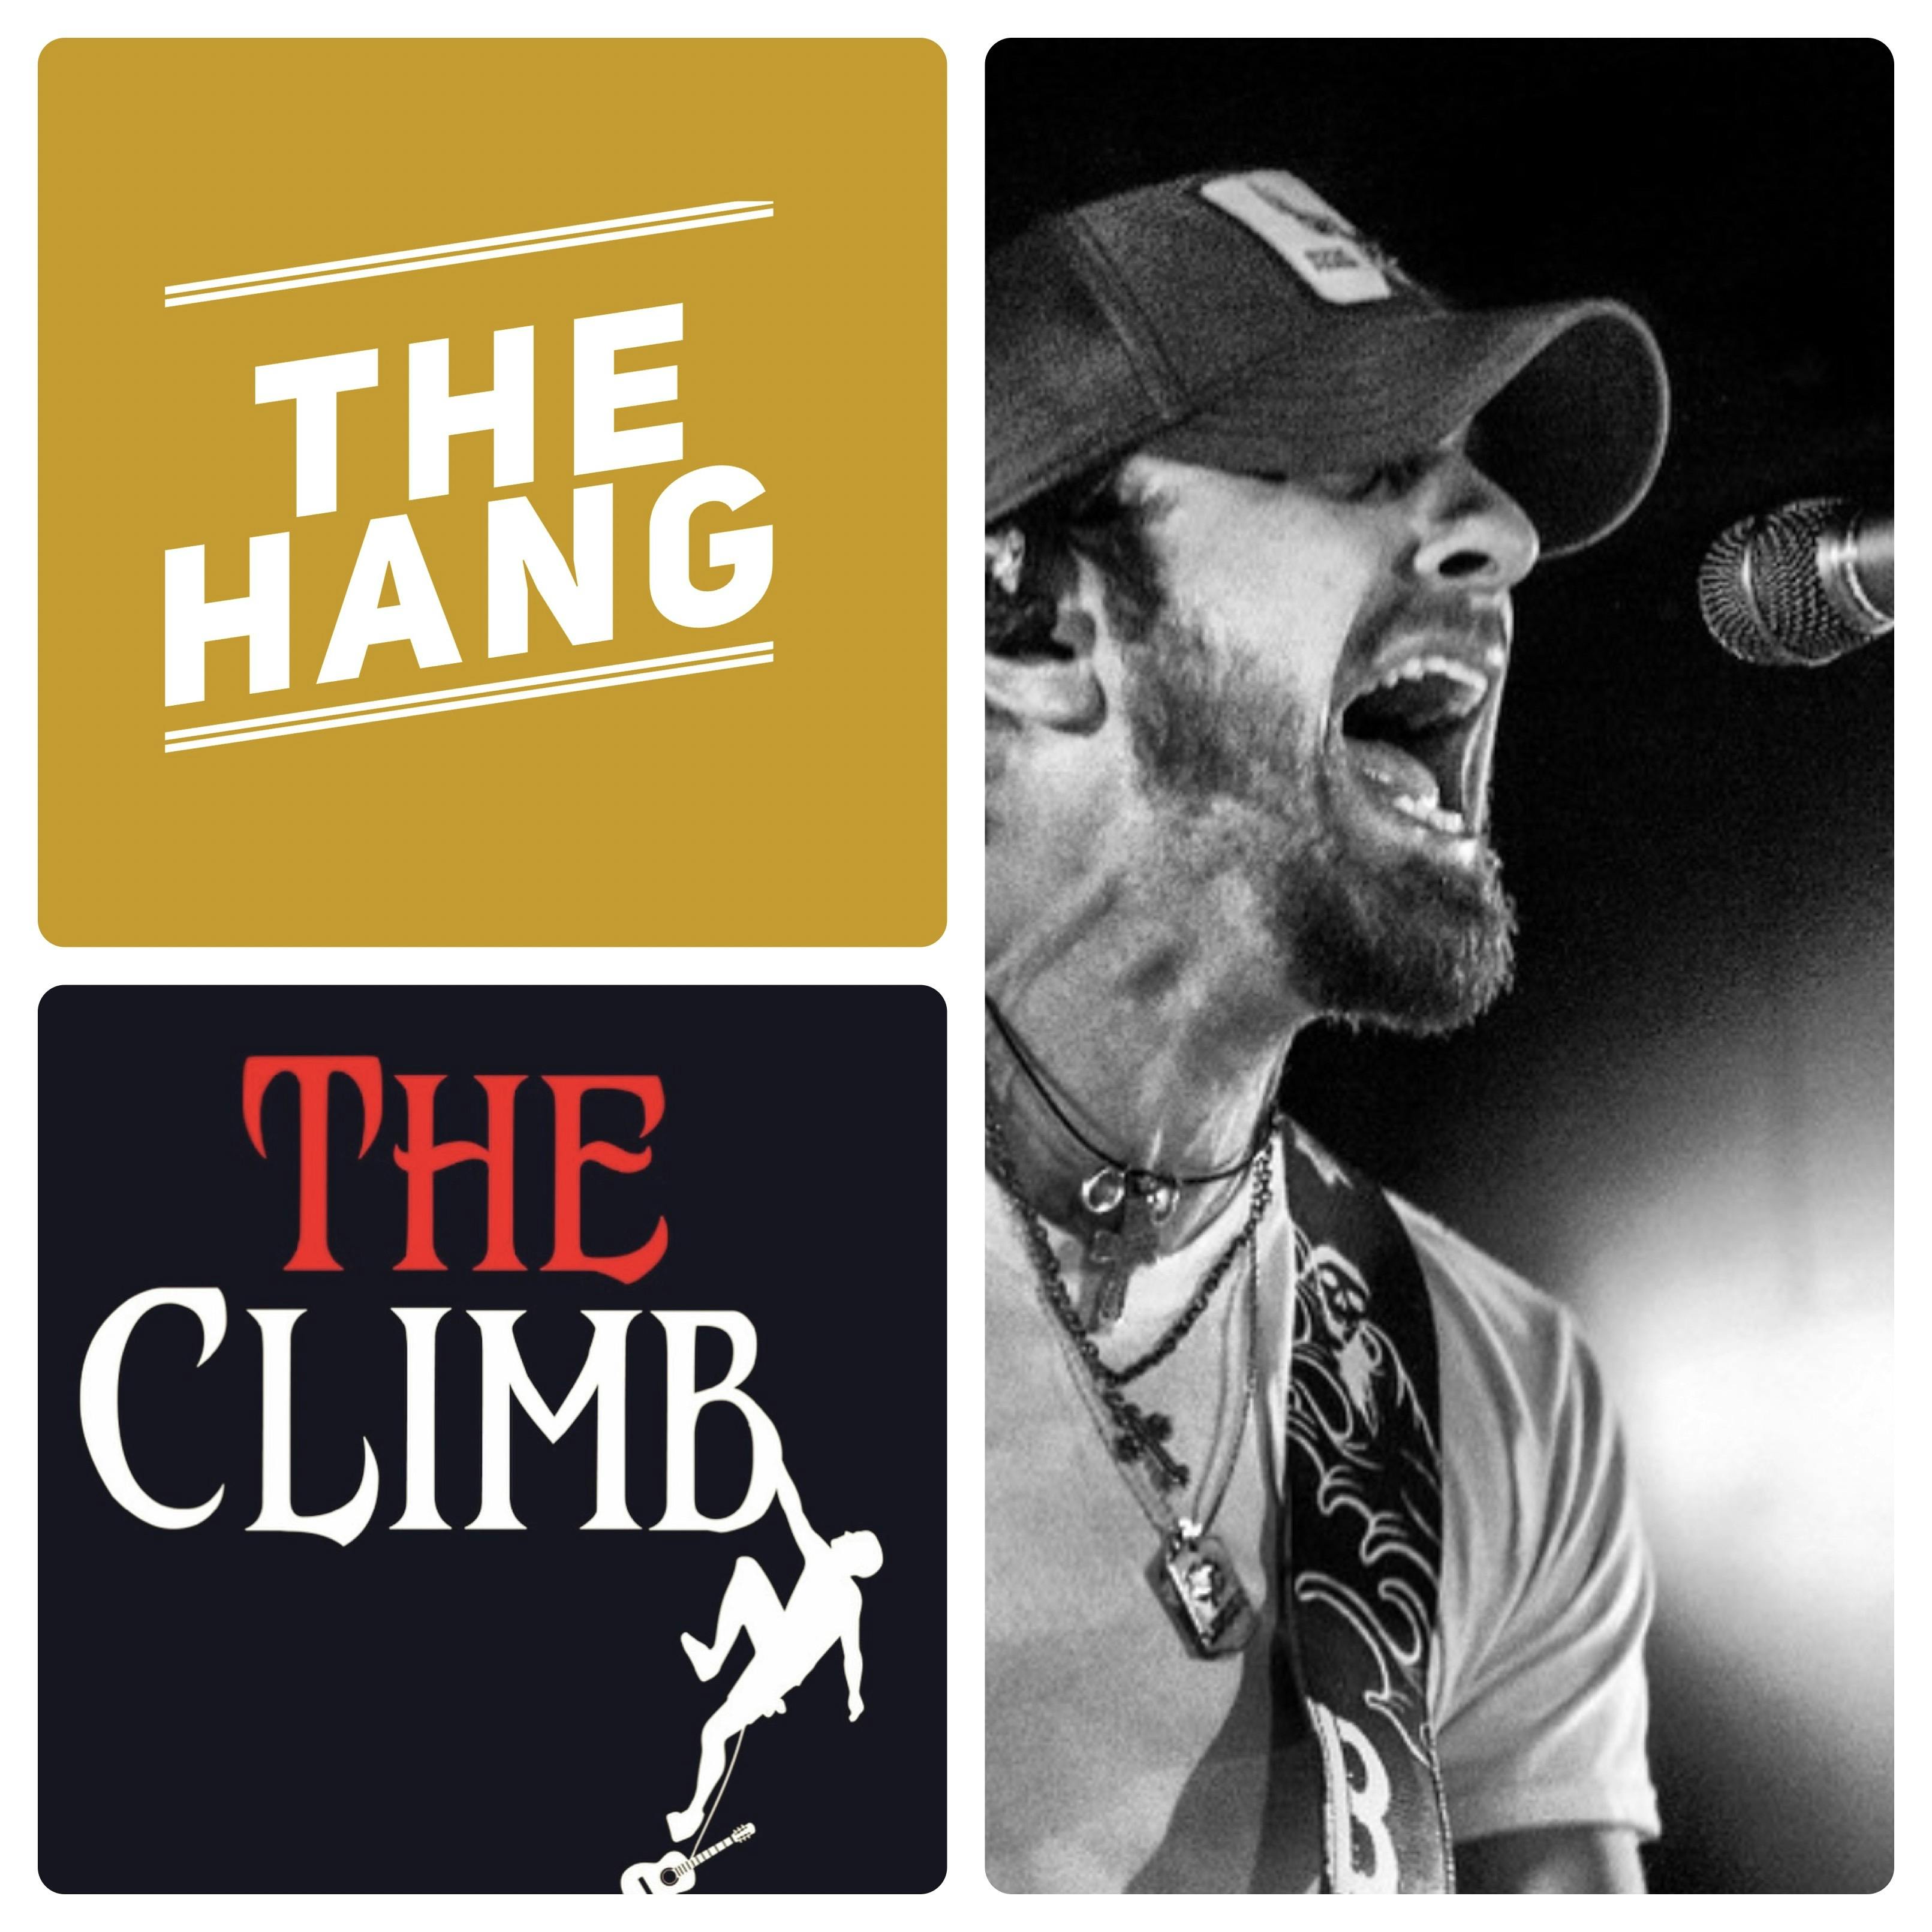 Songwriting Pro’s ”The Hang” with Hit Songwriter, Brian Davis